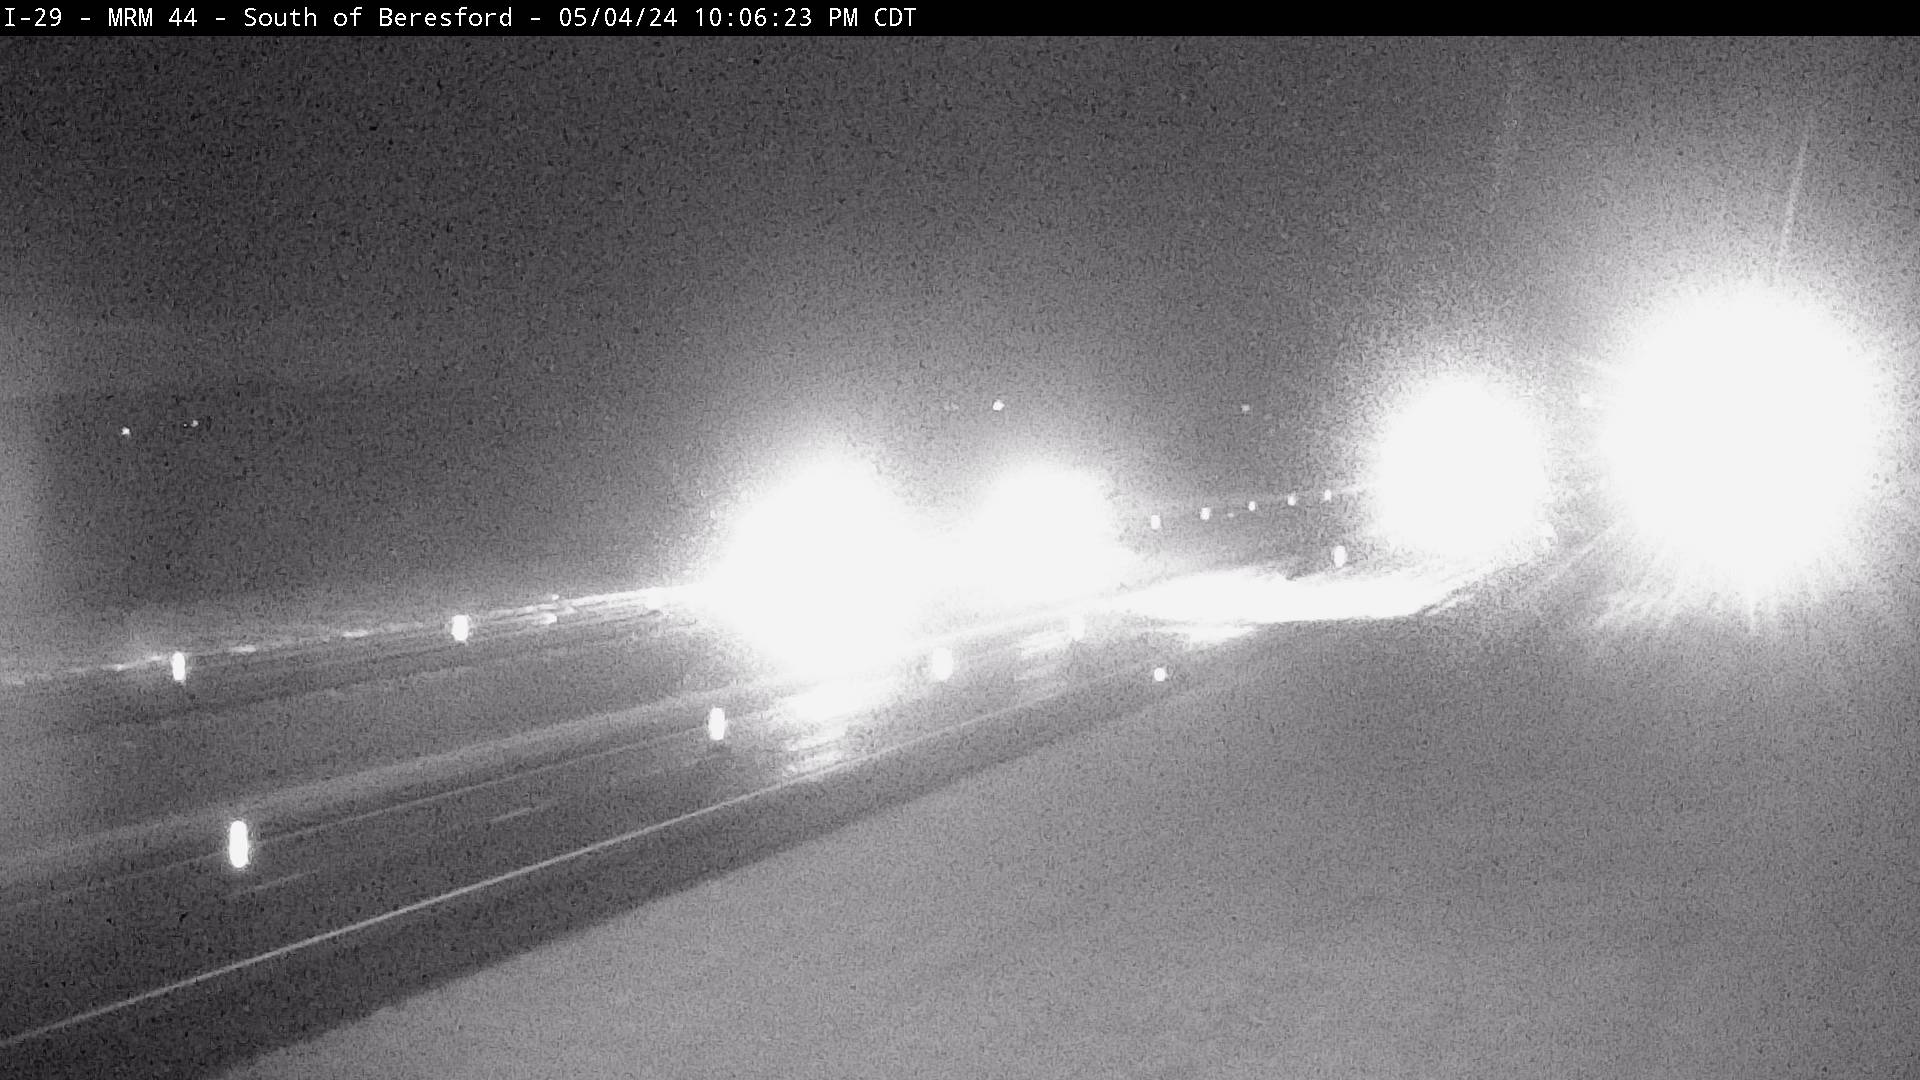 Traffic Cam 2 miles south of town along I-29 @ MP 44 - South Player